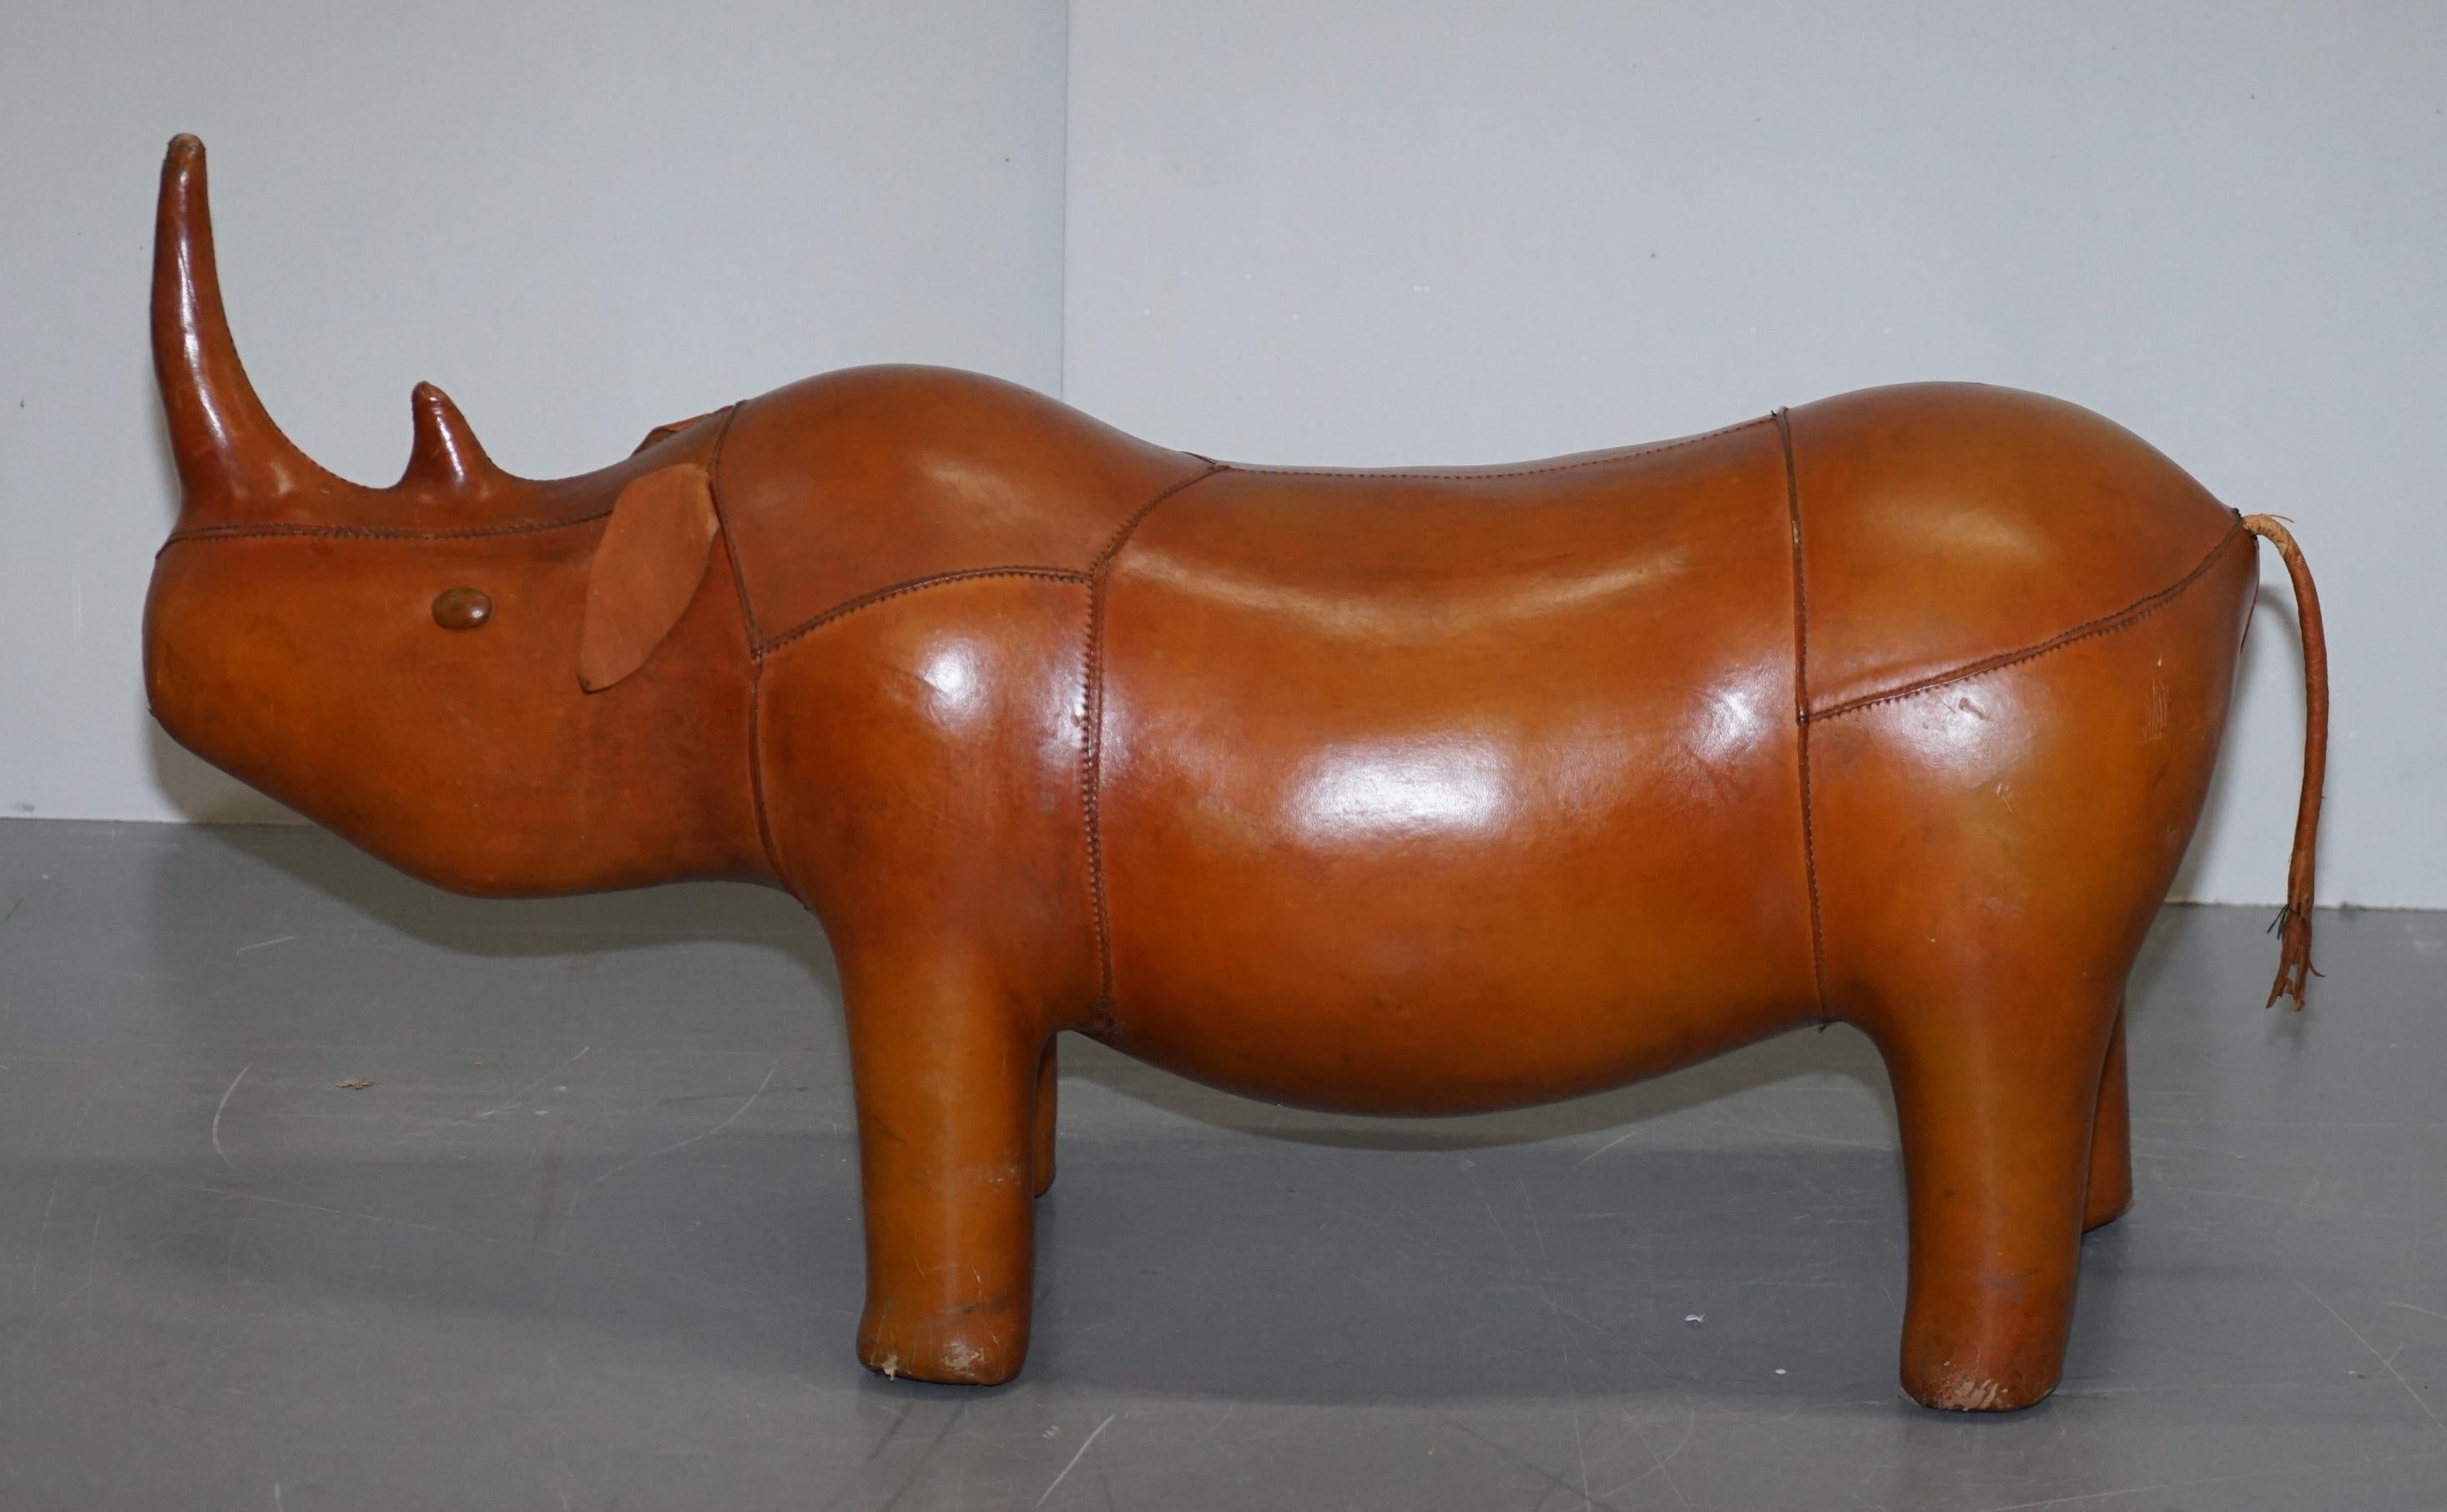 Post-Modern Vintage Liberty's London Rhino in Tan Brown Leather to Be Used as a Footstool